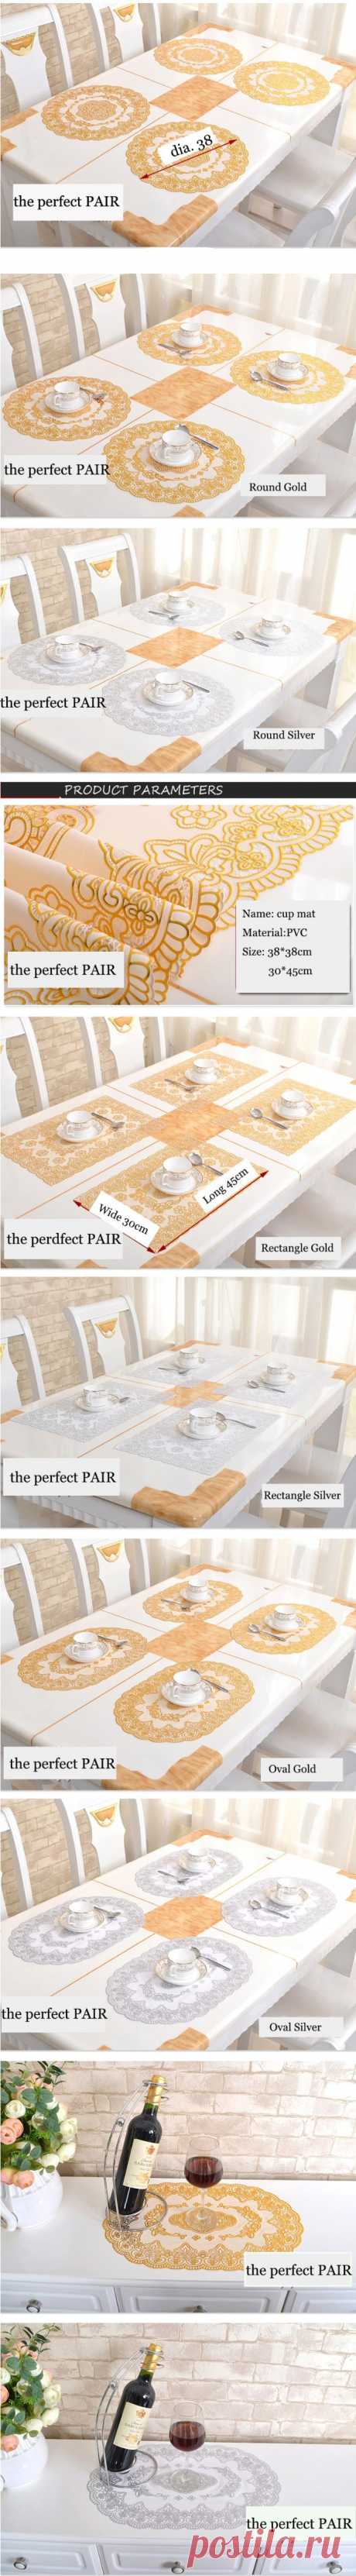 Aliexpress.com : Buy Home Table Cup Mat Creative Decor Coffee Drink Placemat Table Cloth Tablecloth Table Cover High Quality Europe Style from Reliable drinking quotes suppliers on BSBP | Alibaba Group